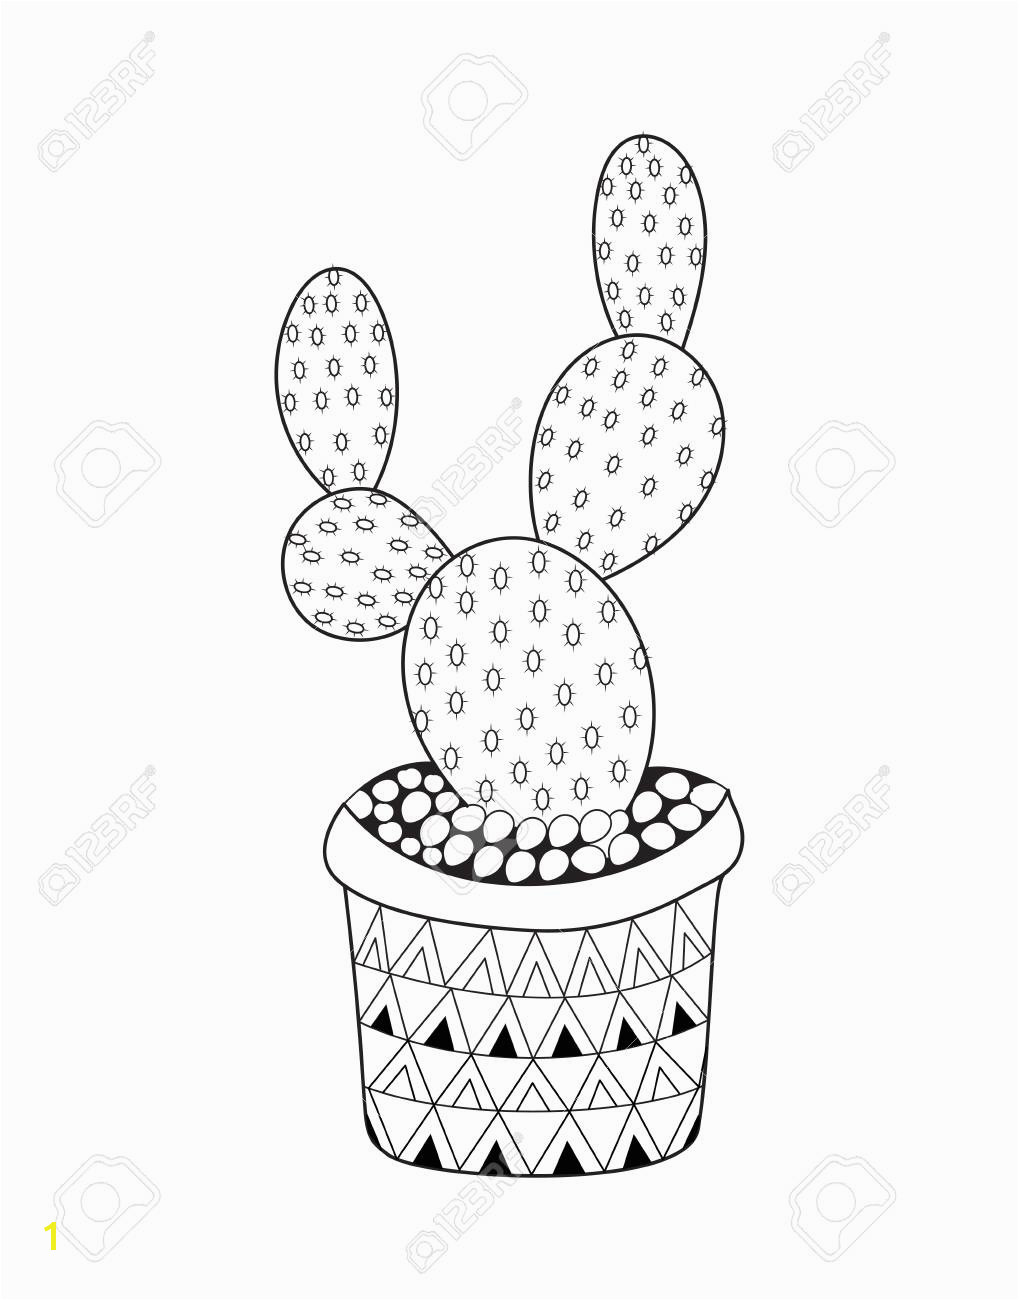 Free Cactus Coloring Pages Cactus Opuntia Microdasys Cactus for Adult Coloring Page Vector